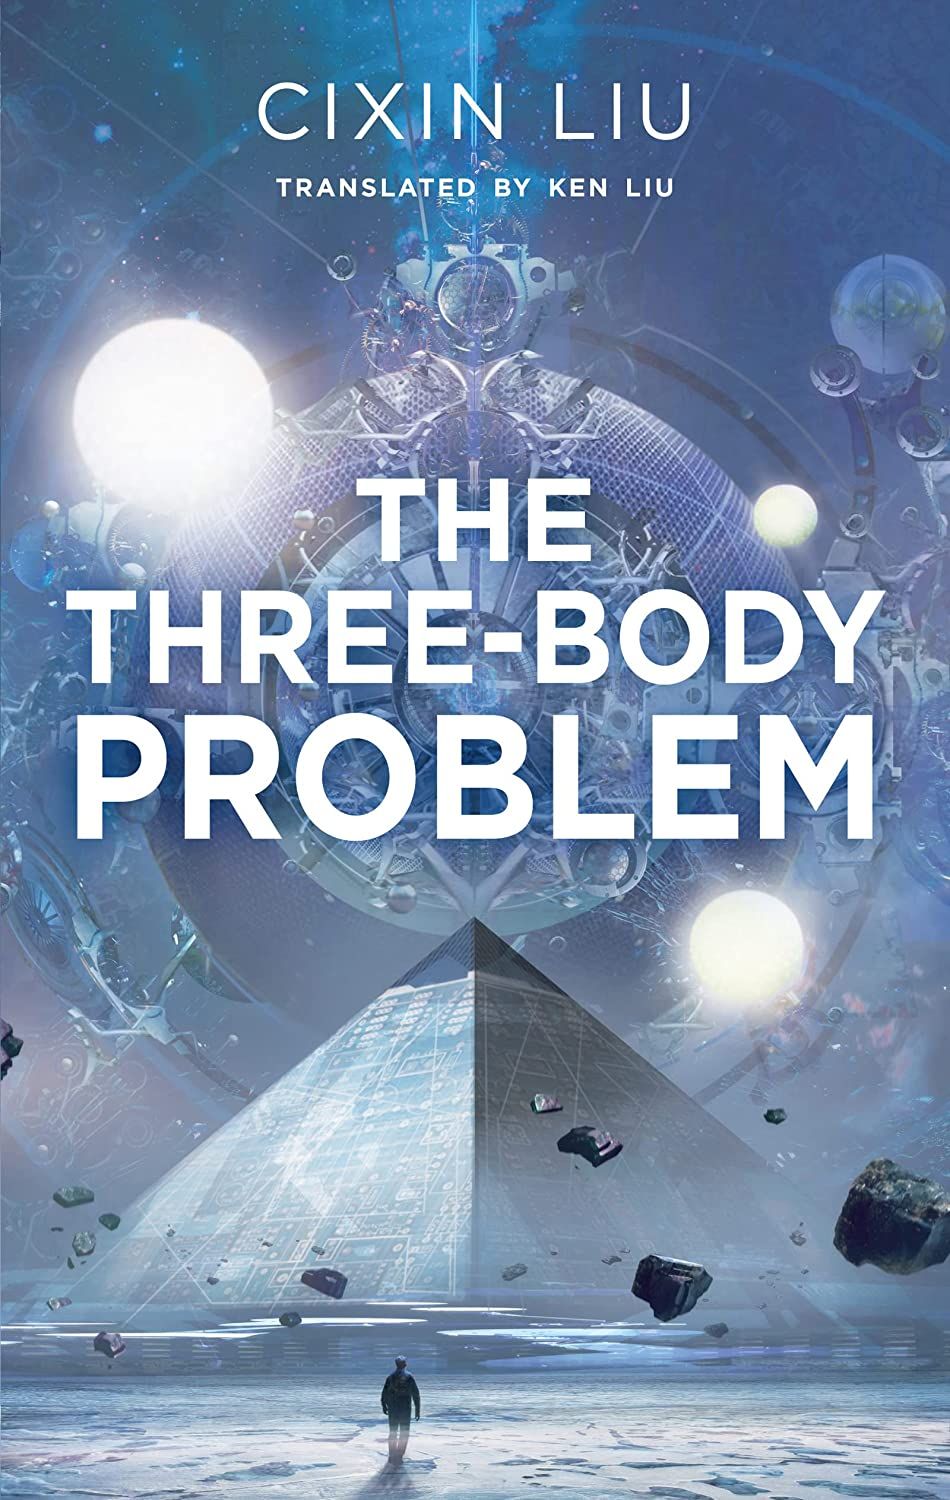 3 Body Problem' Netflix Series: Everything We Know So Far - What's